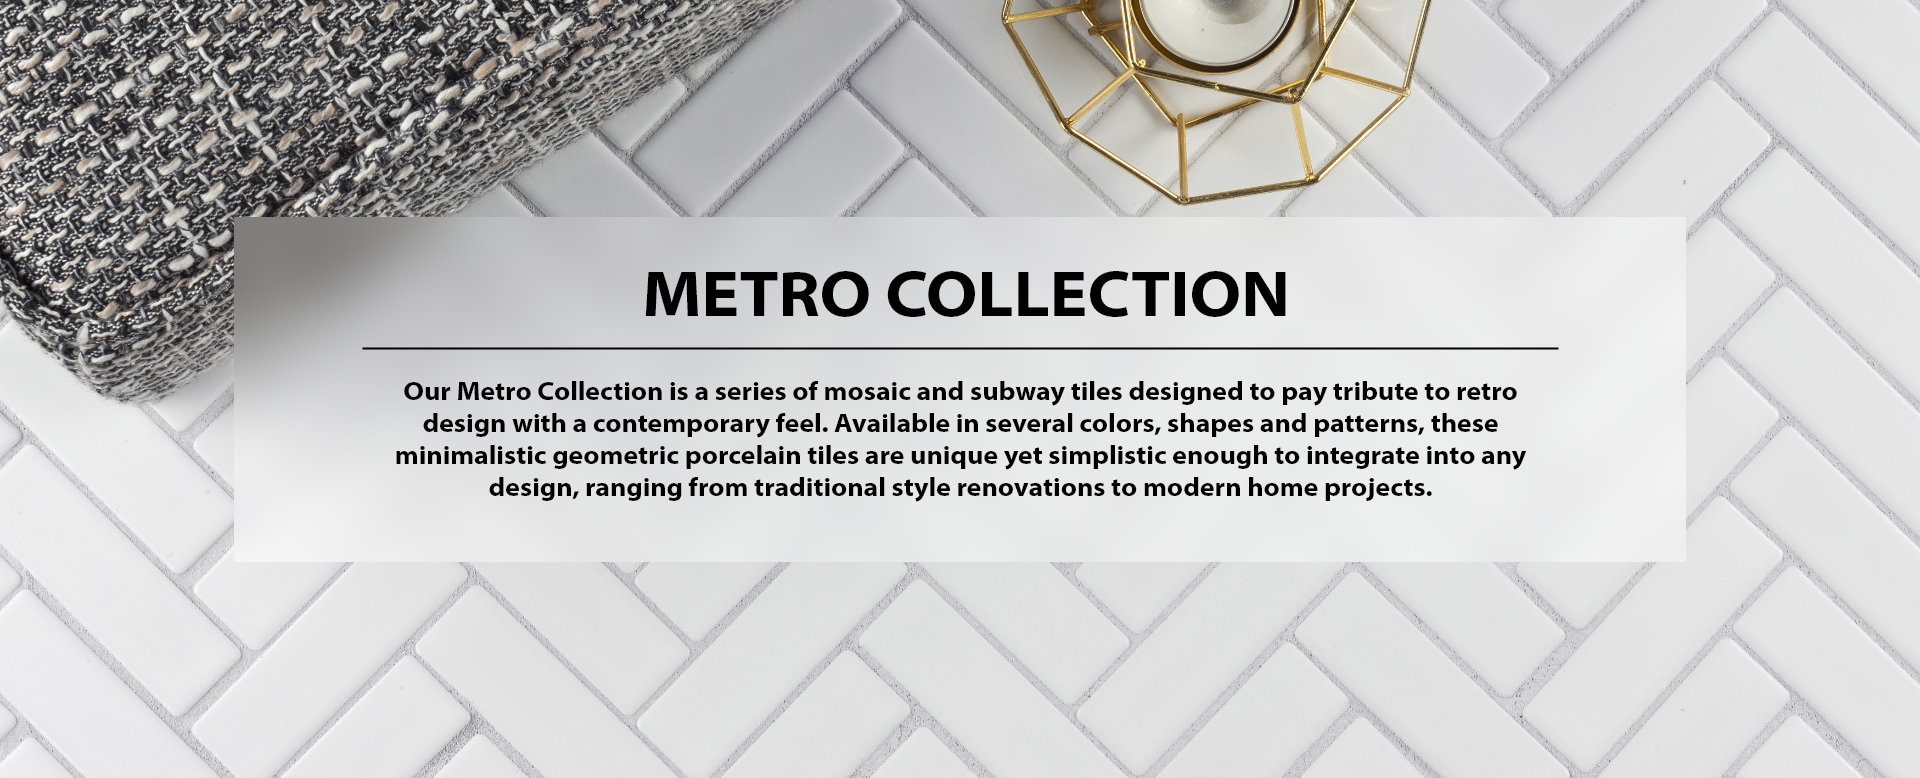 Metro Collection